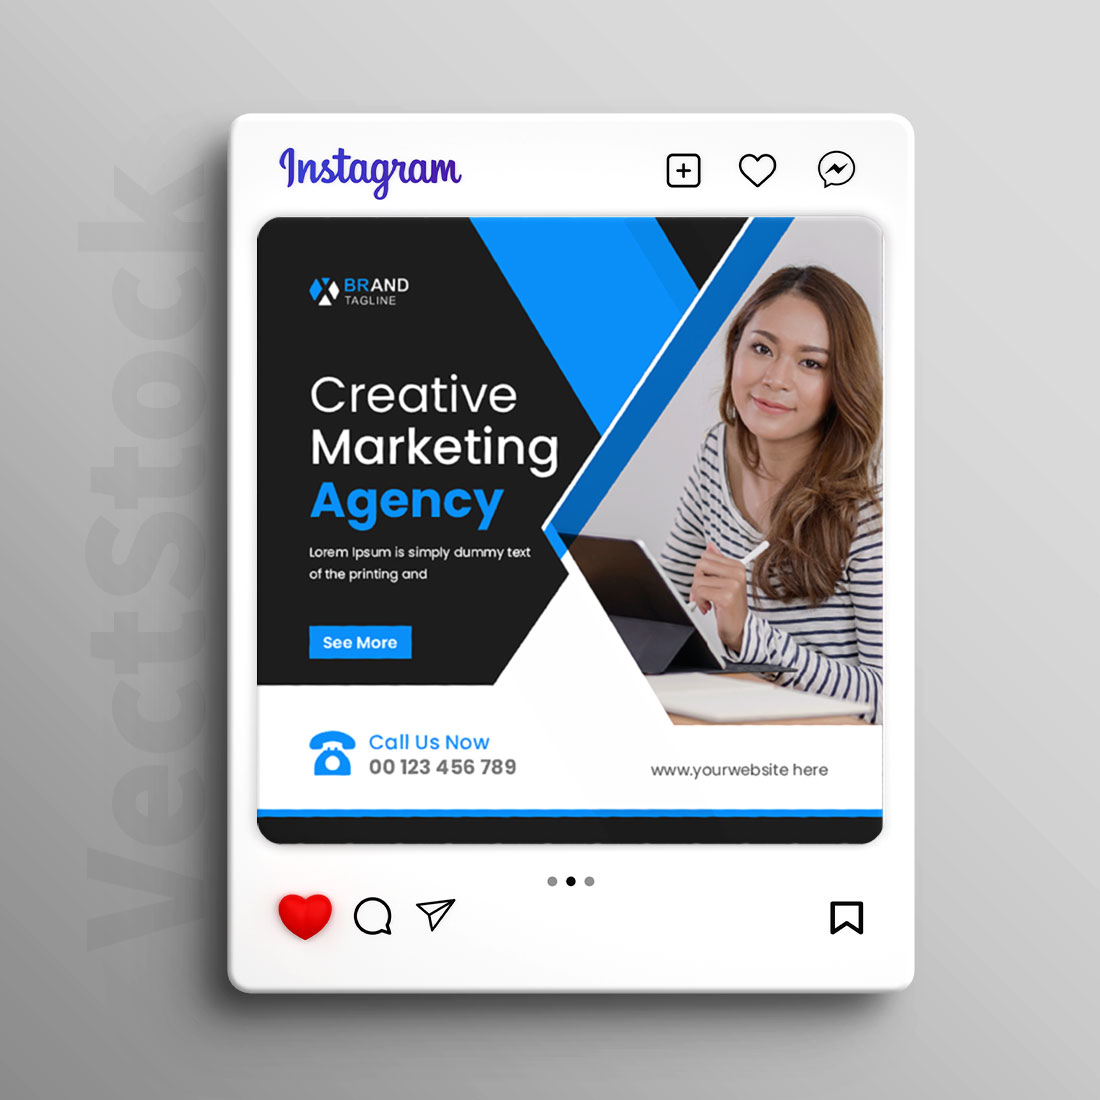 Digital marketing agency instagram post and social media banner template cover image.